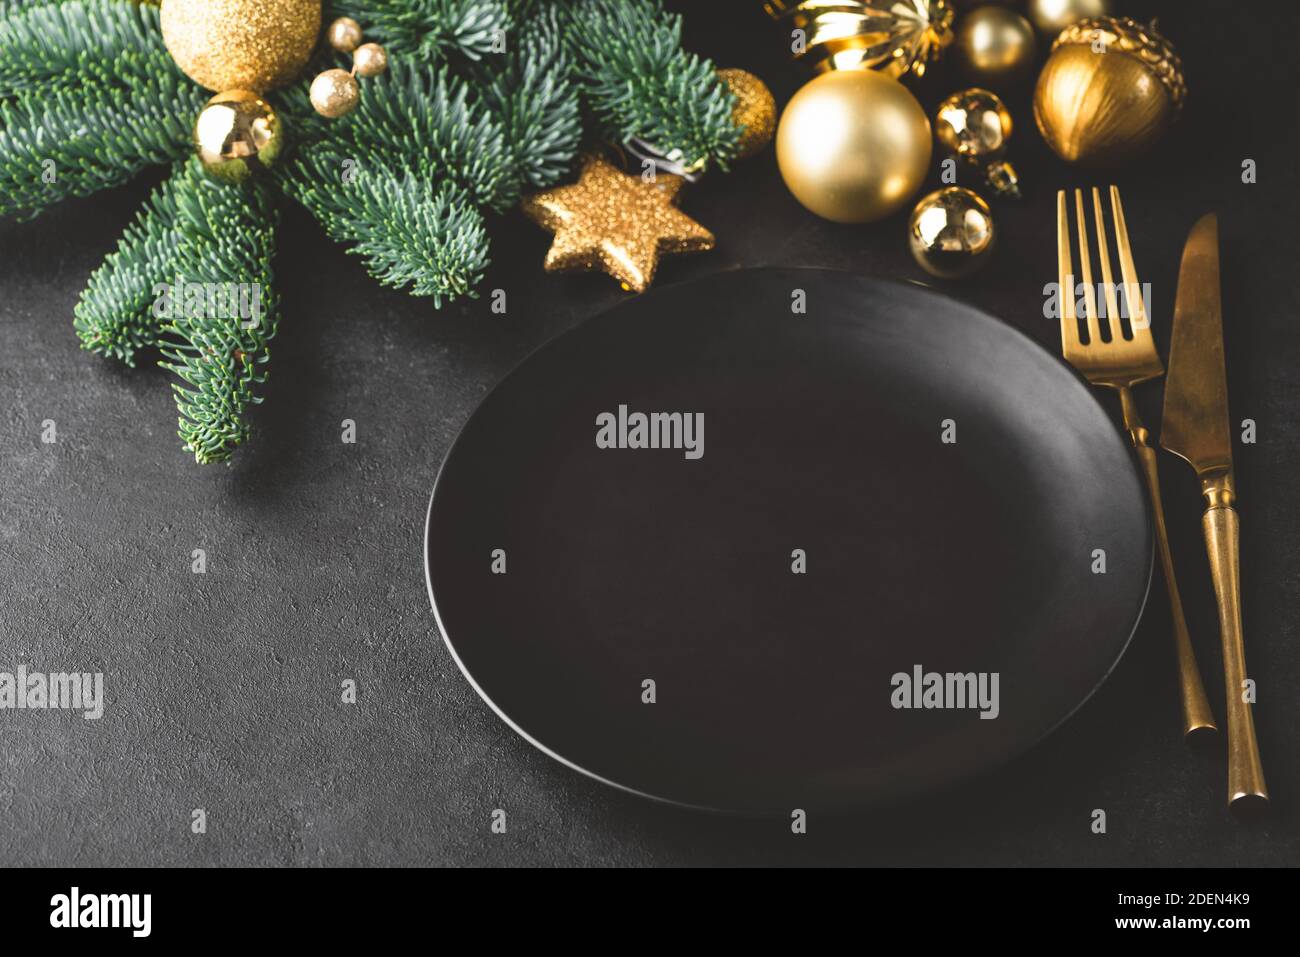 Elegant Christmas, New Year table setting in black. Black plate, golden color silverware, fir tree and toys. Copy space for text, design Stock Photo